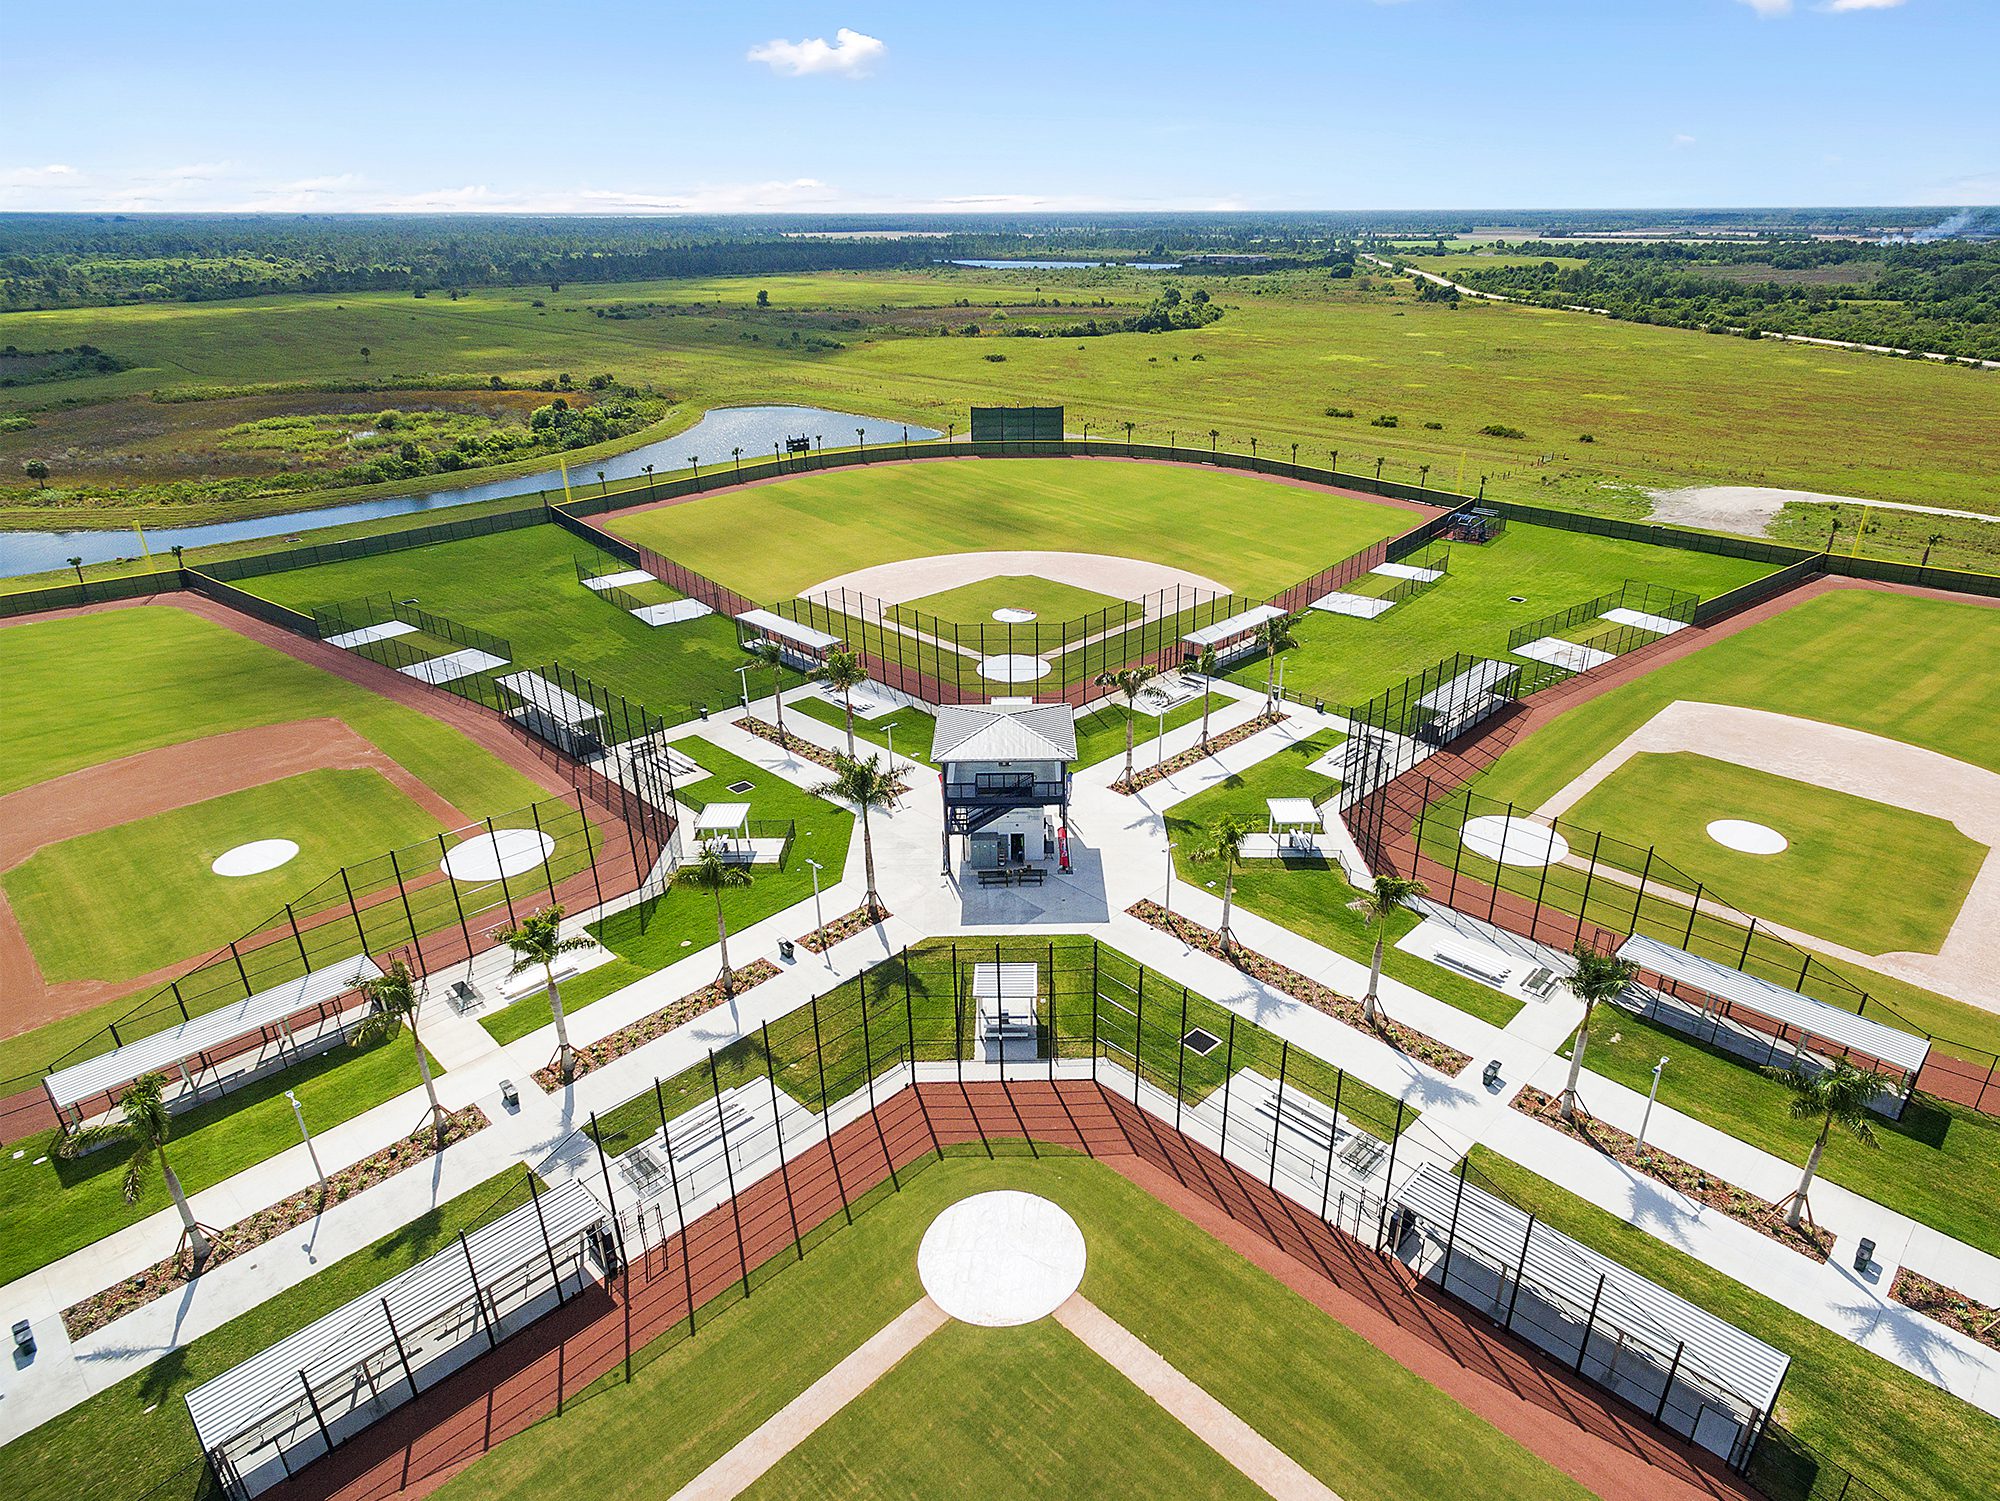 CoolToday Park opens in North Port for Atlanta Braves